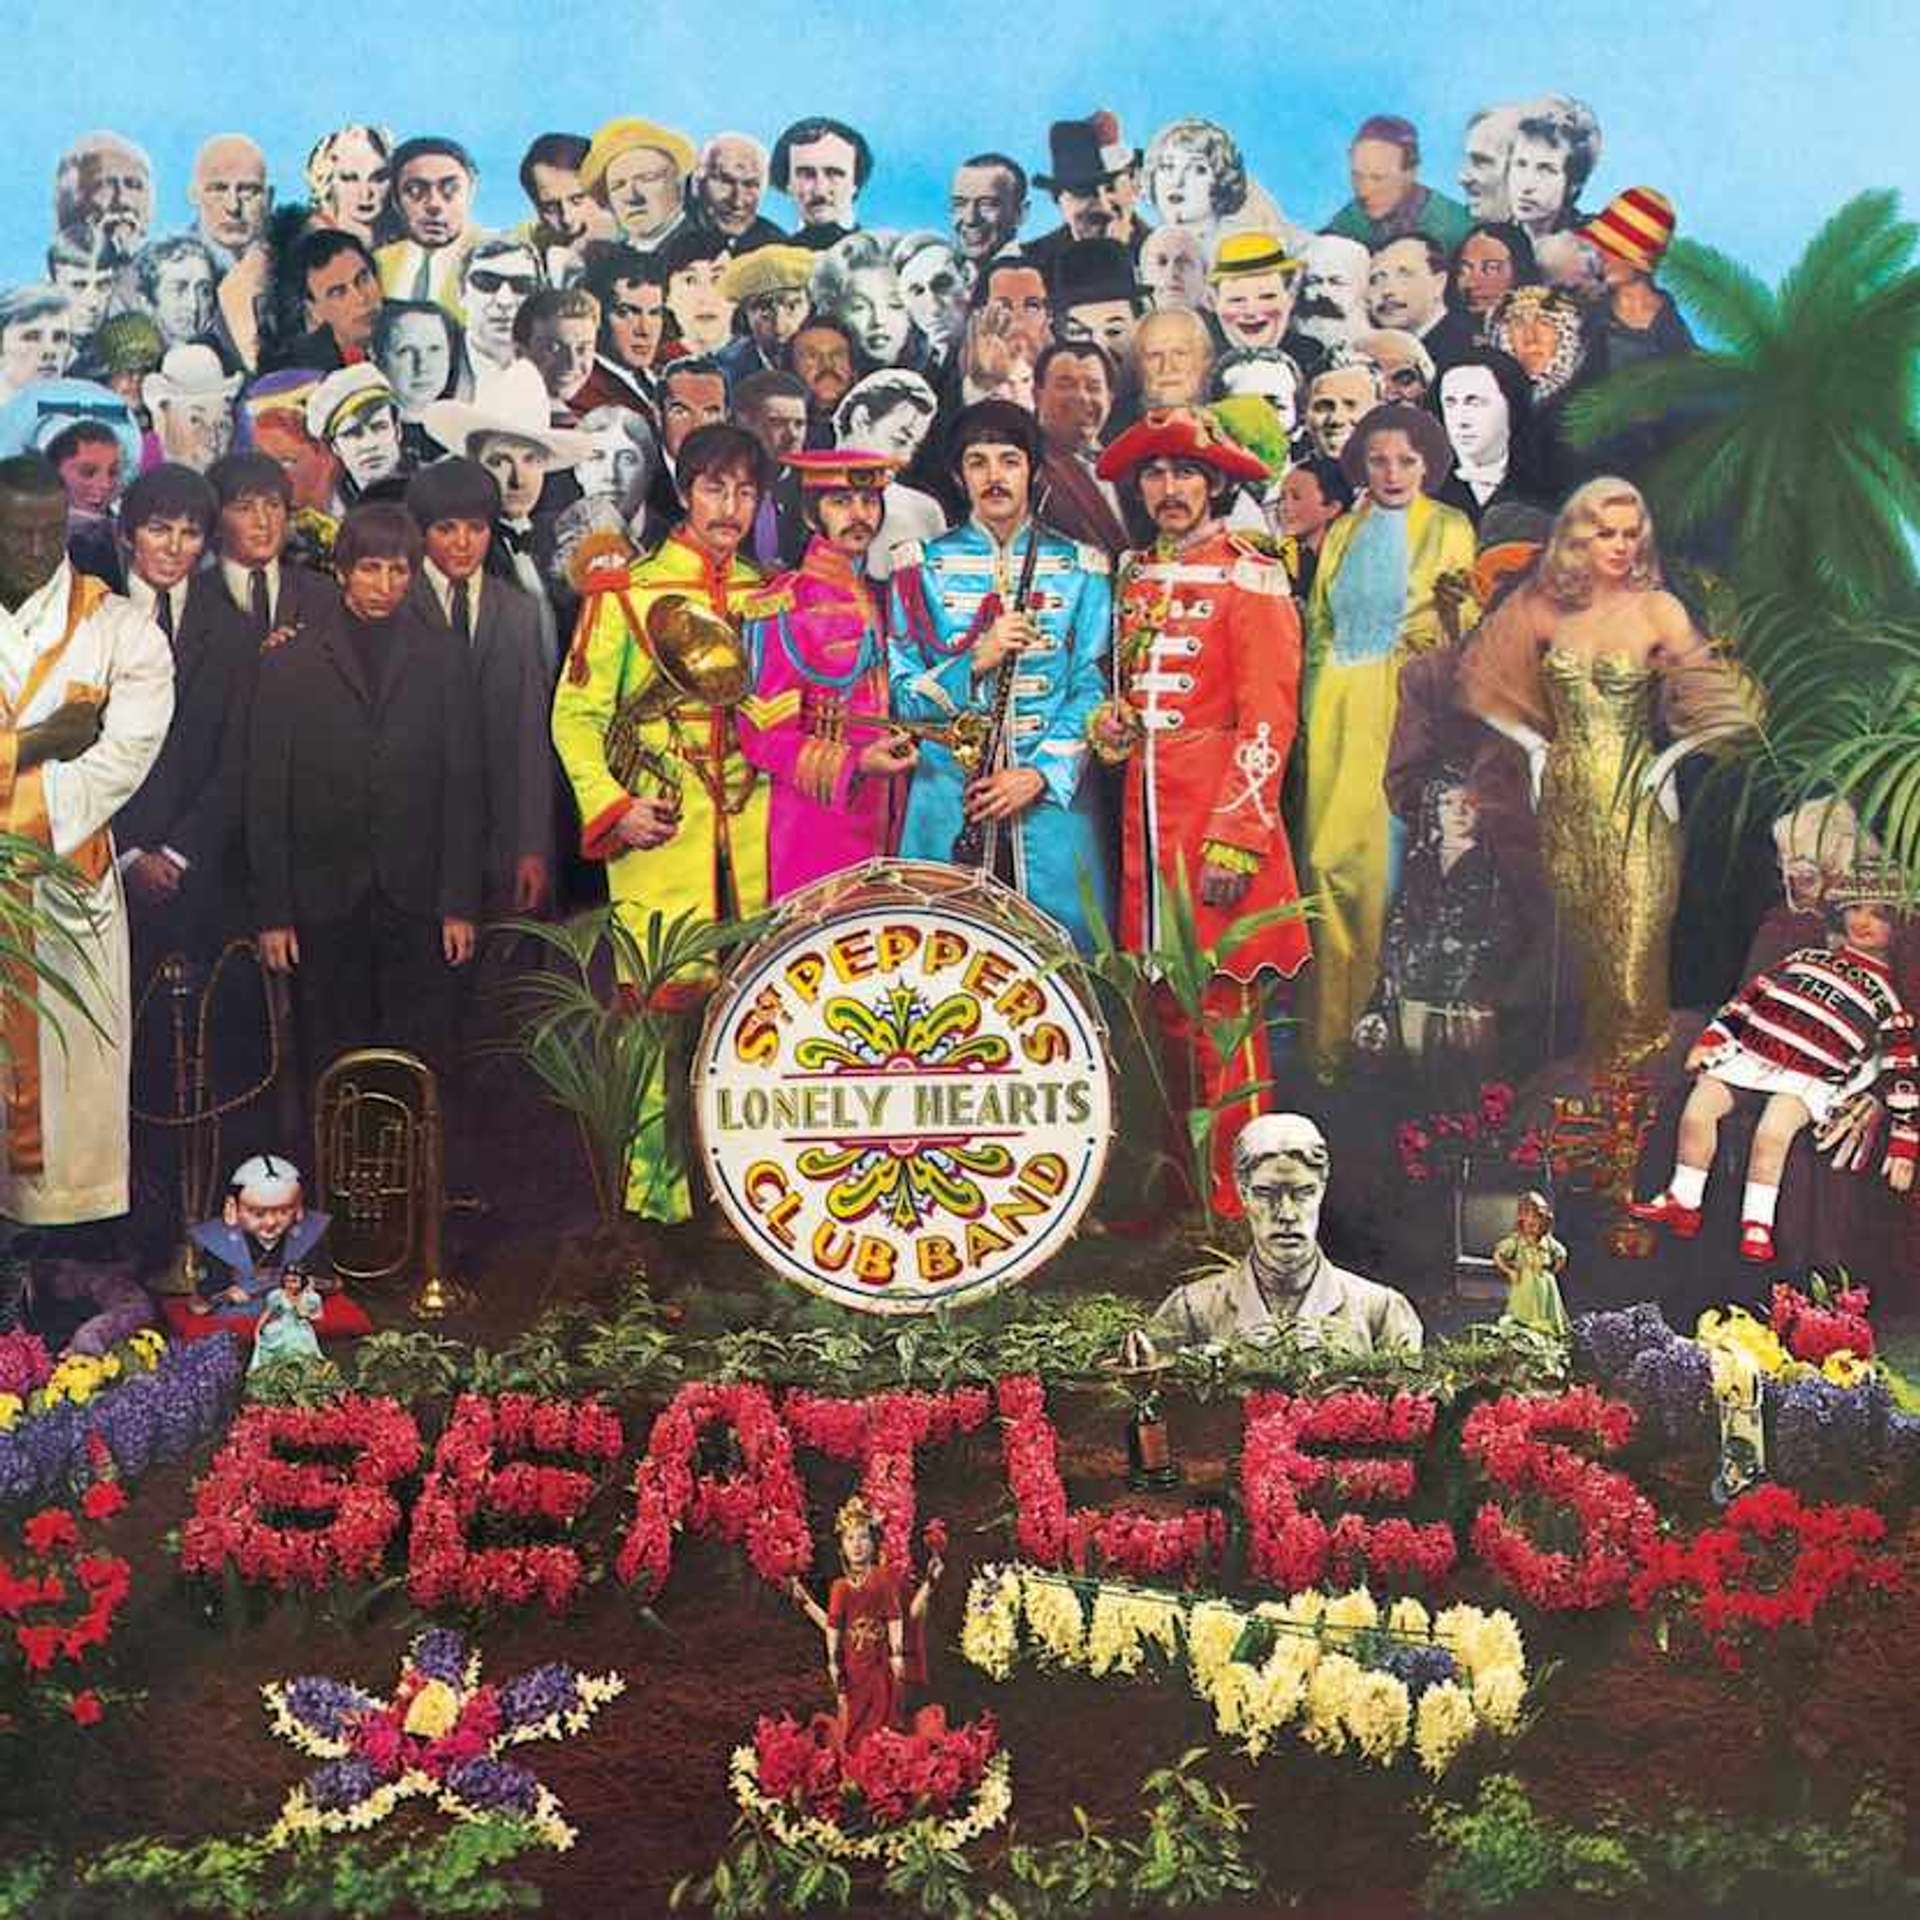 An image of the album cover for Sgt. Pepper’s Lonely Hearts Club Band by artists Peter Blake and Jann Haworth. It shows The Beatles, dressed in the style of a military band, against a background composed of over 70 notable personalities. In the front, there is a garden with the band’s name